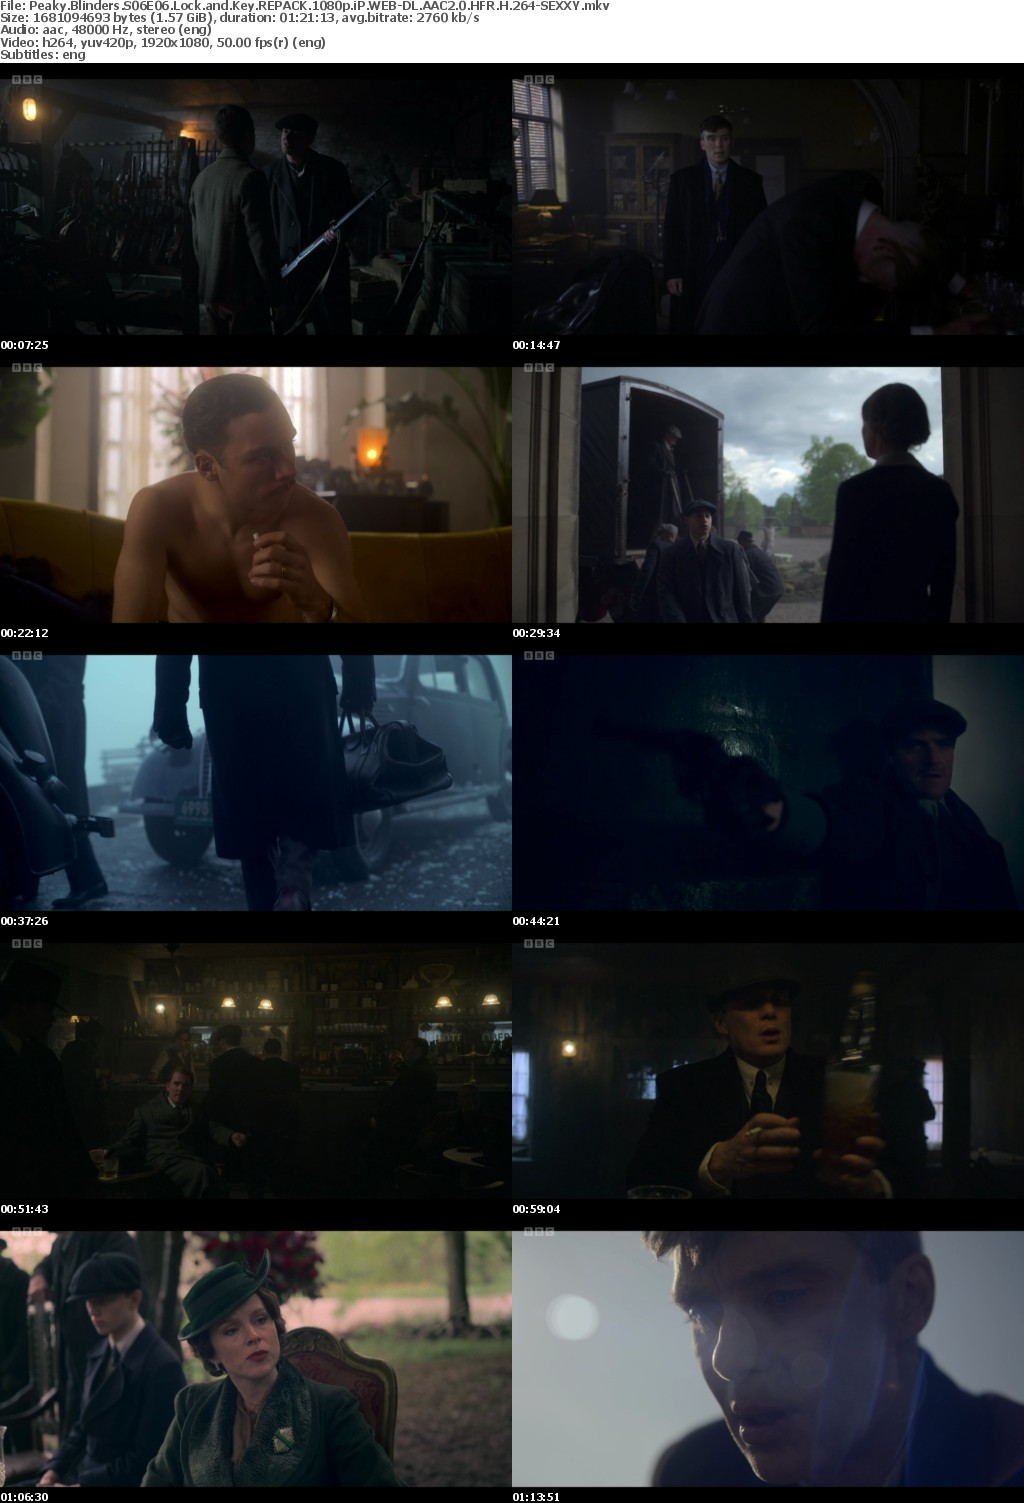 Peaky Blinders S06E06 Lock and Key REPACK 1080p iP WEB-DL AAC2 0 HFR H 264-SEXXY